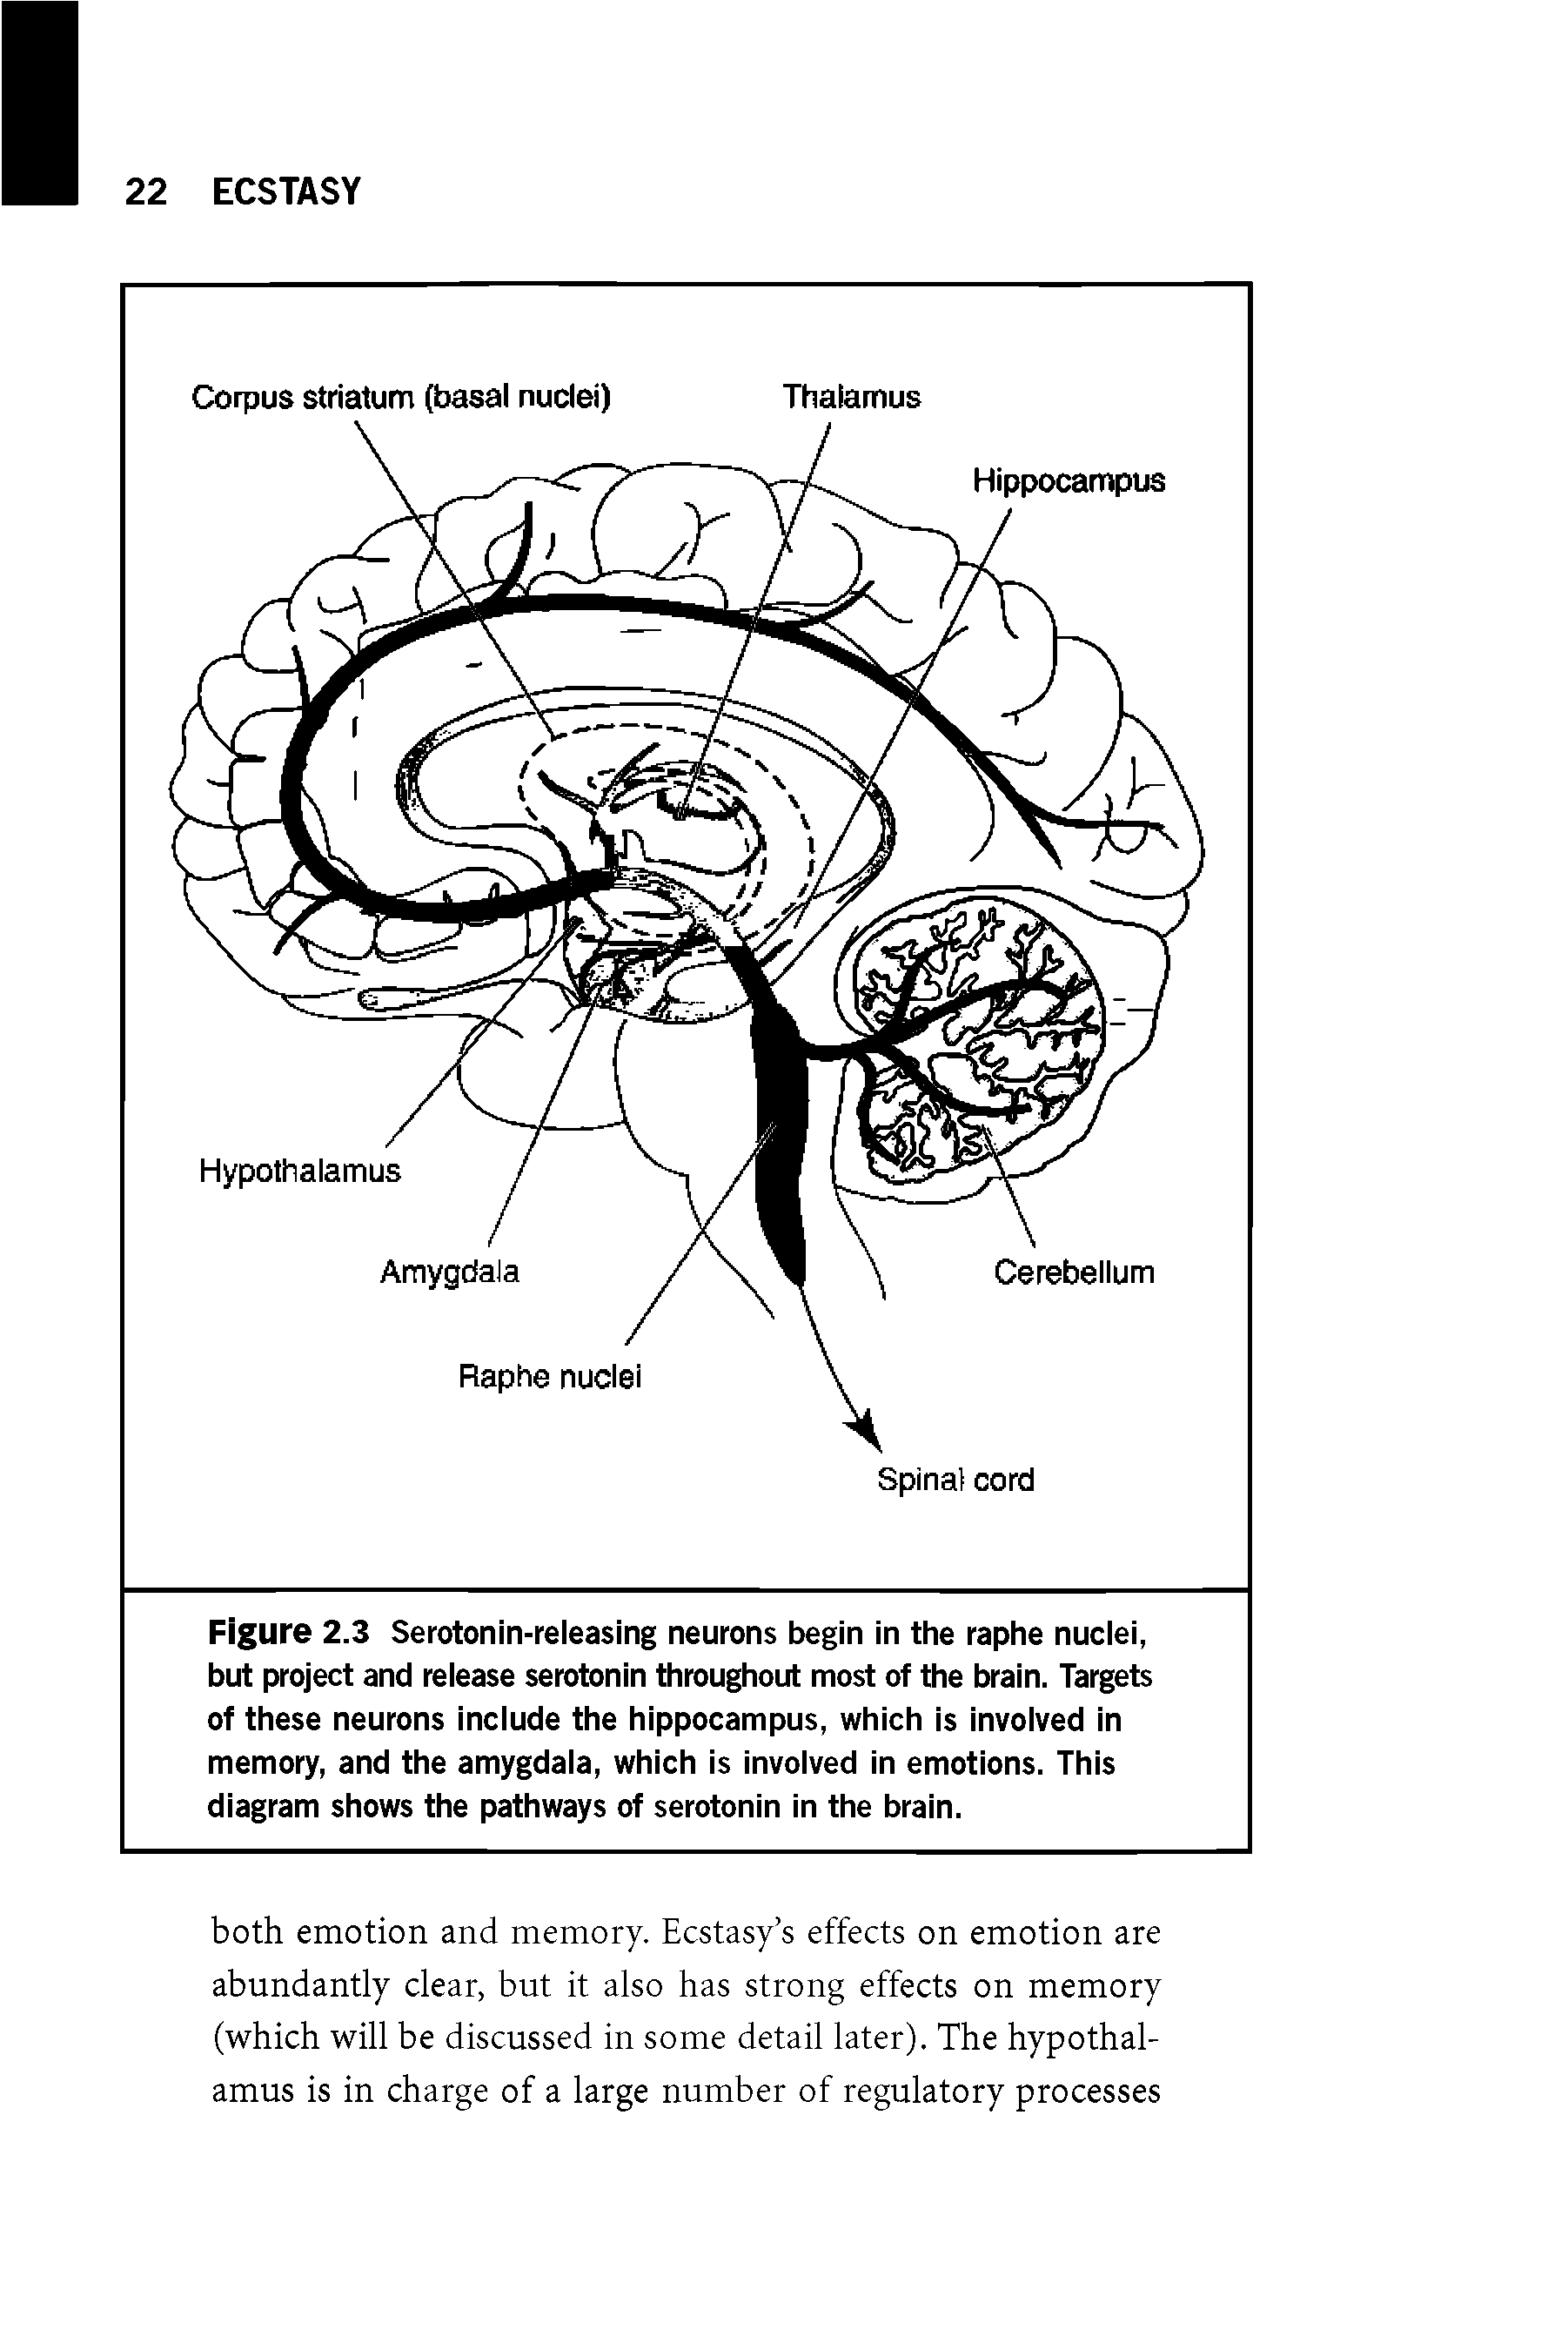 Figure 2.3 Serotonin-releasing neurons begin in the raphe nuclei, but project and release serotonin throughout most of the brain. Targets of these neurons include the hippocampus, which is involved in memory, and the amygdala, which is involved in emotions. This diagram shows the pathways of serotonin in the brain.